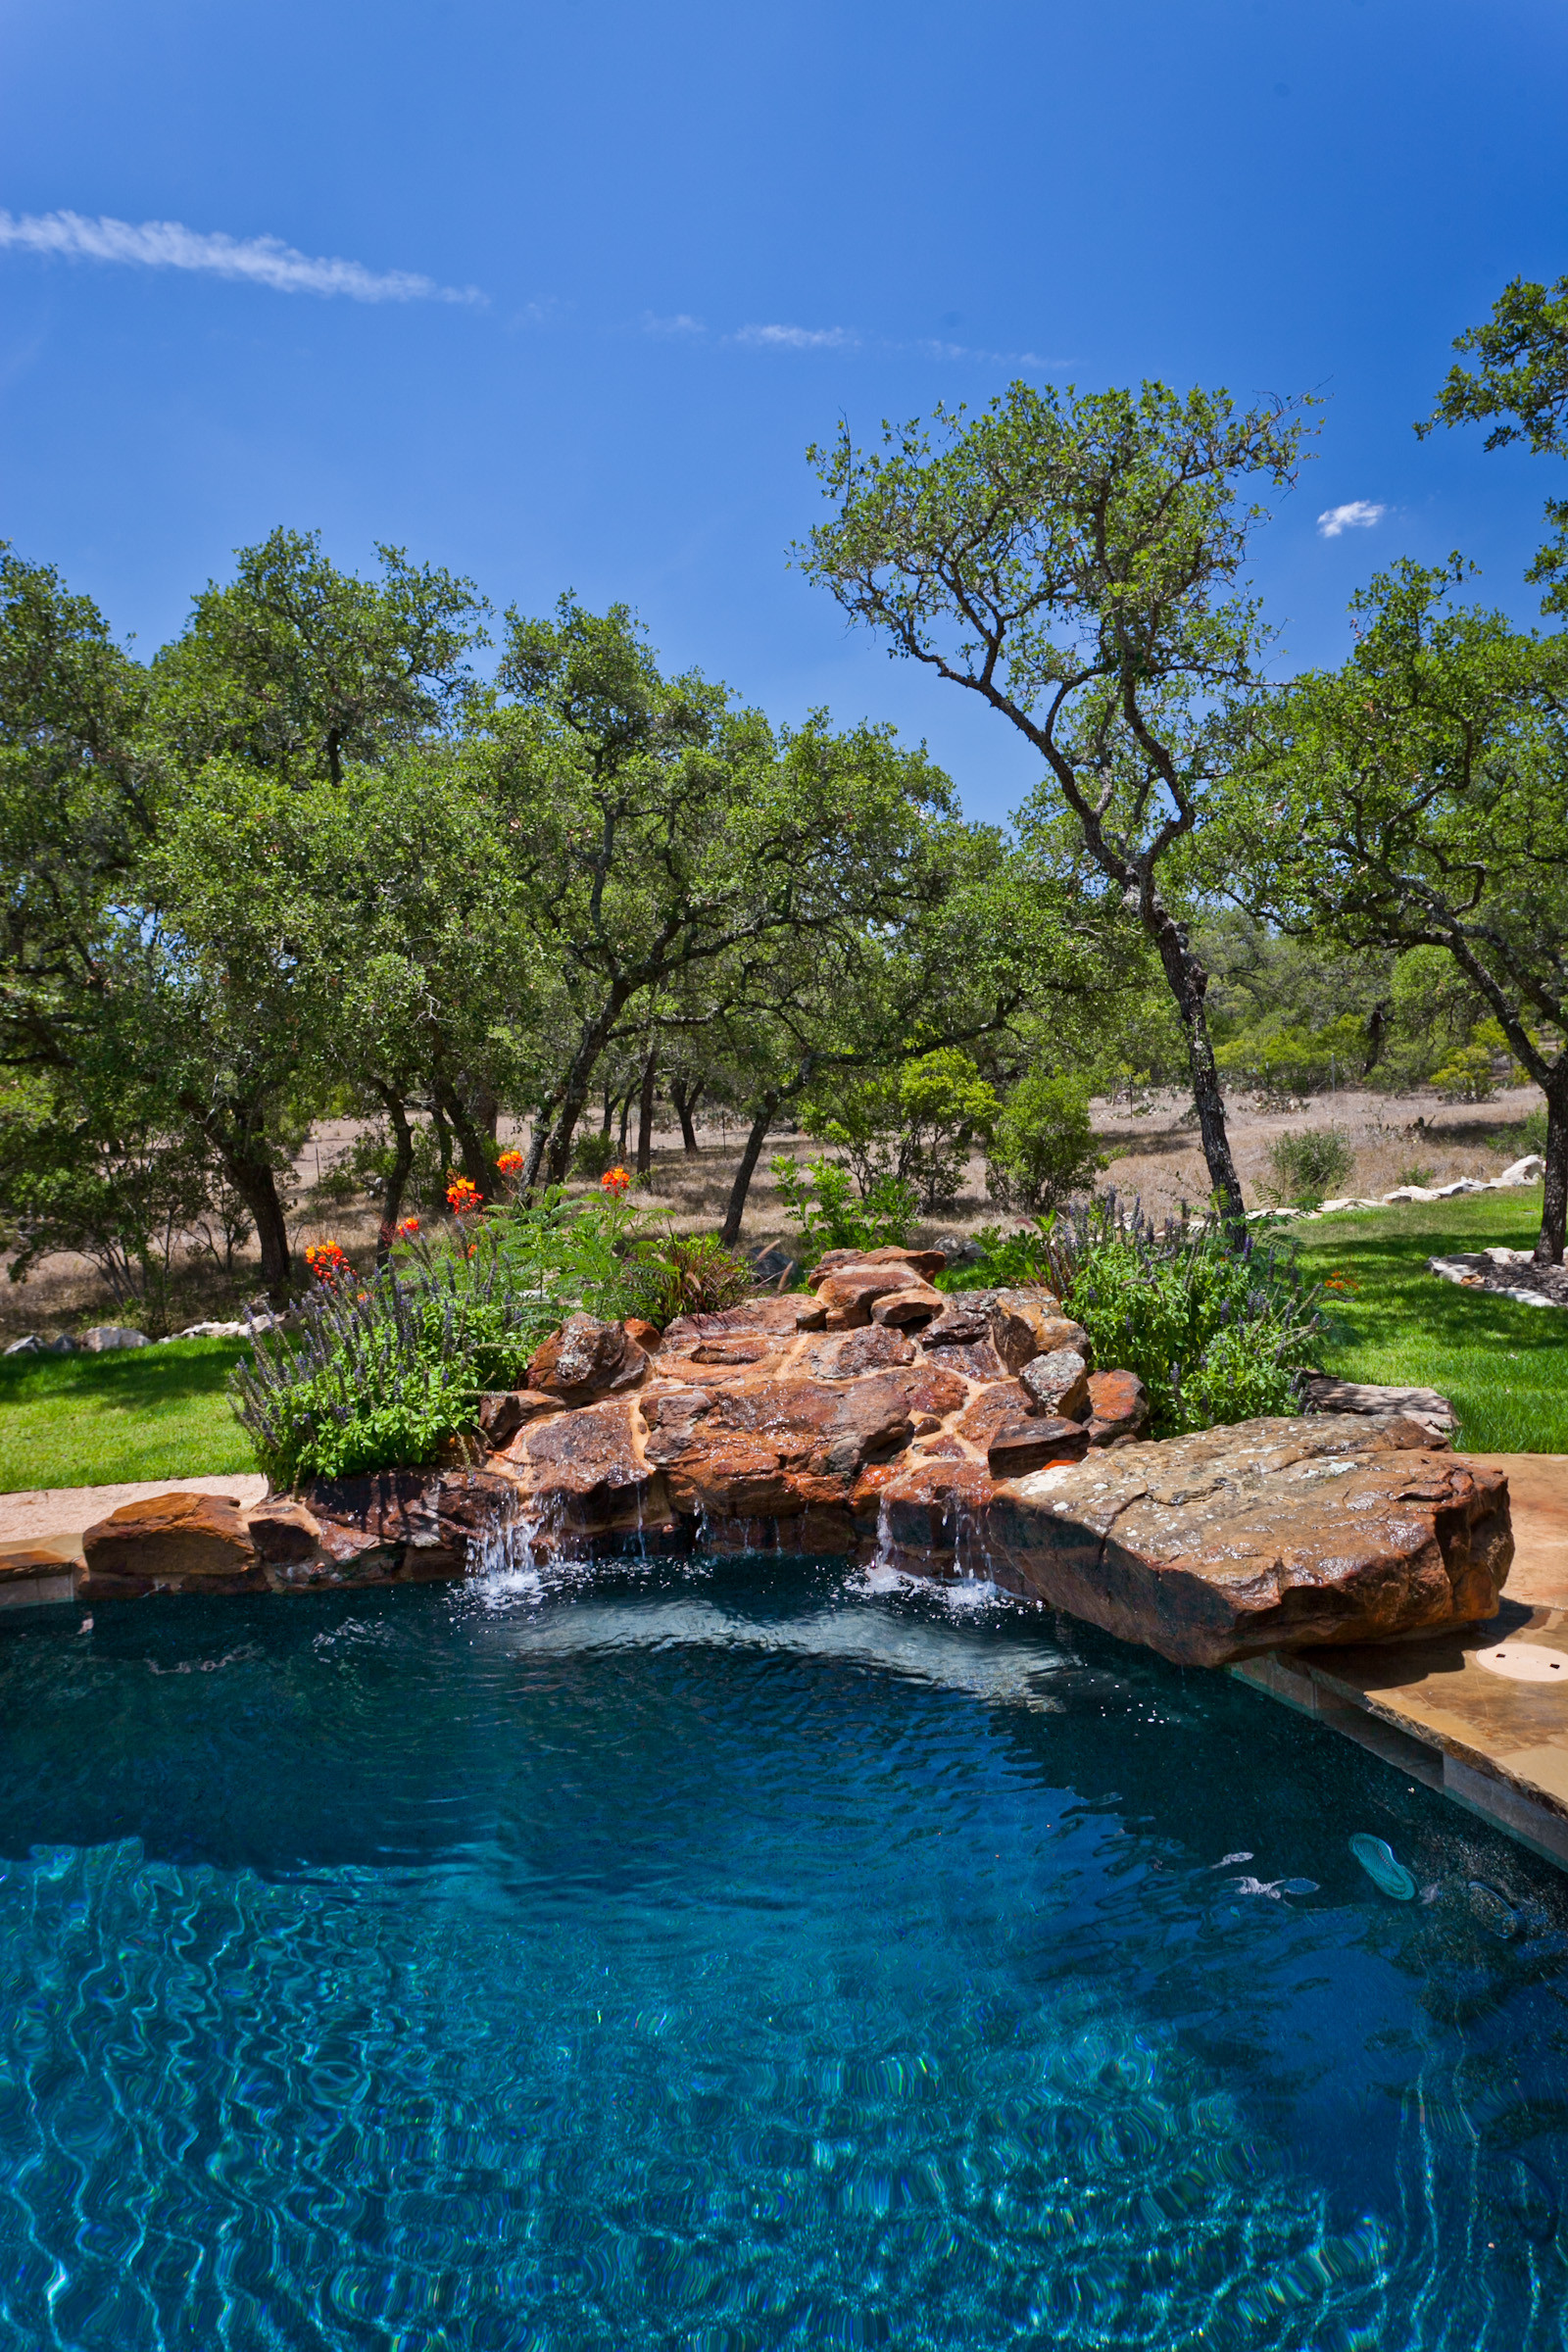 Wimberly Natural/Freeform Pool and Spa